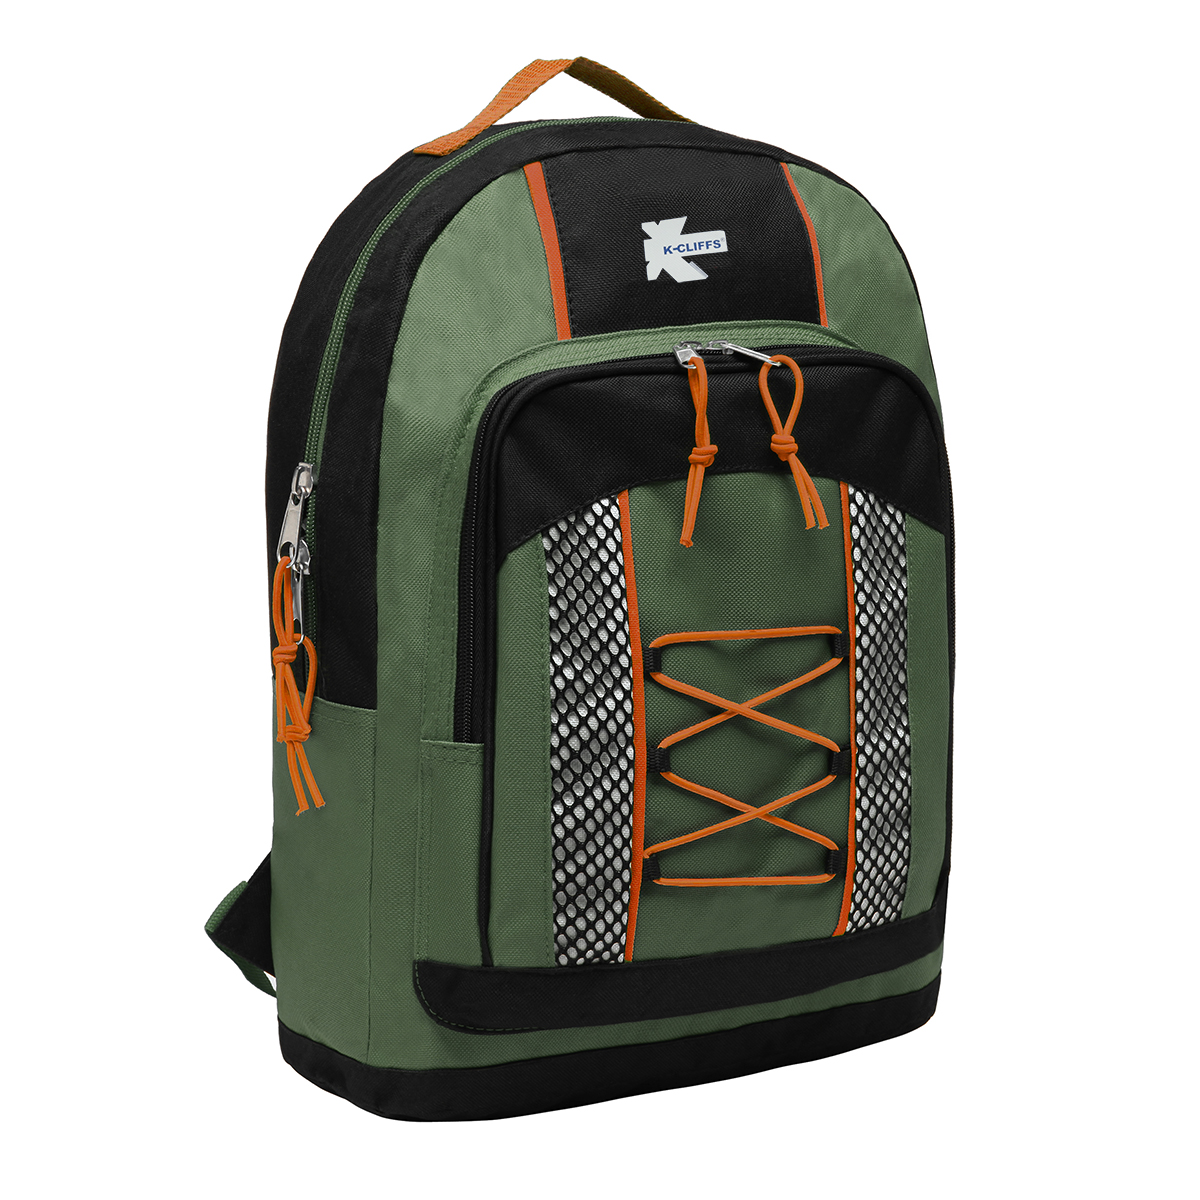 K-Cliffs 15" Lightweight Backpack, Daypack Bungee Water Resistant for Travel School and College, Unisex Color for Casual Everyday Kids & Teens (Olive) - image 1 of 4